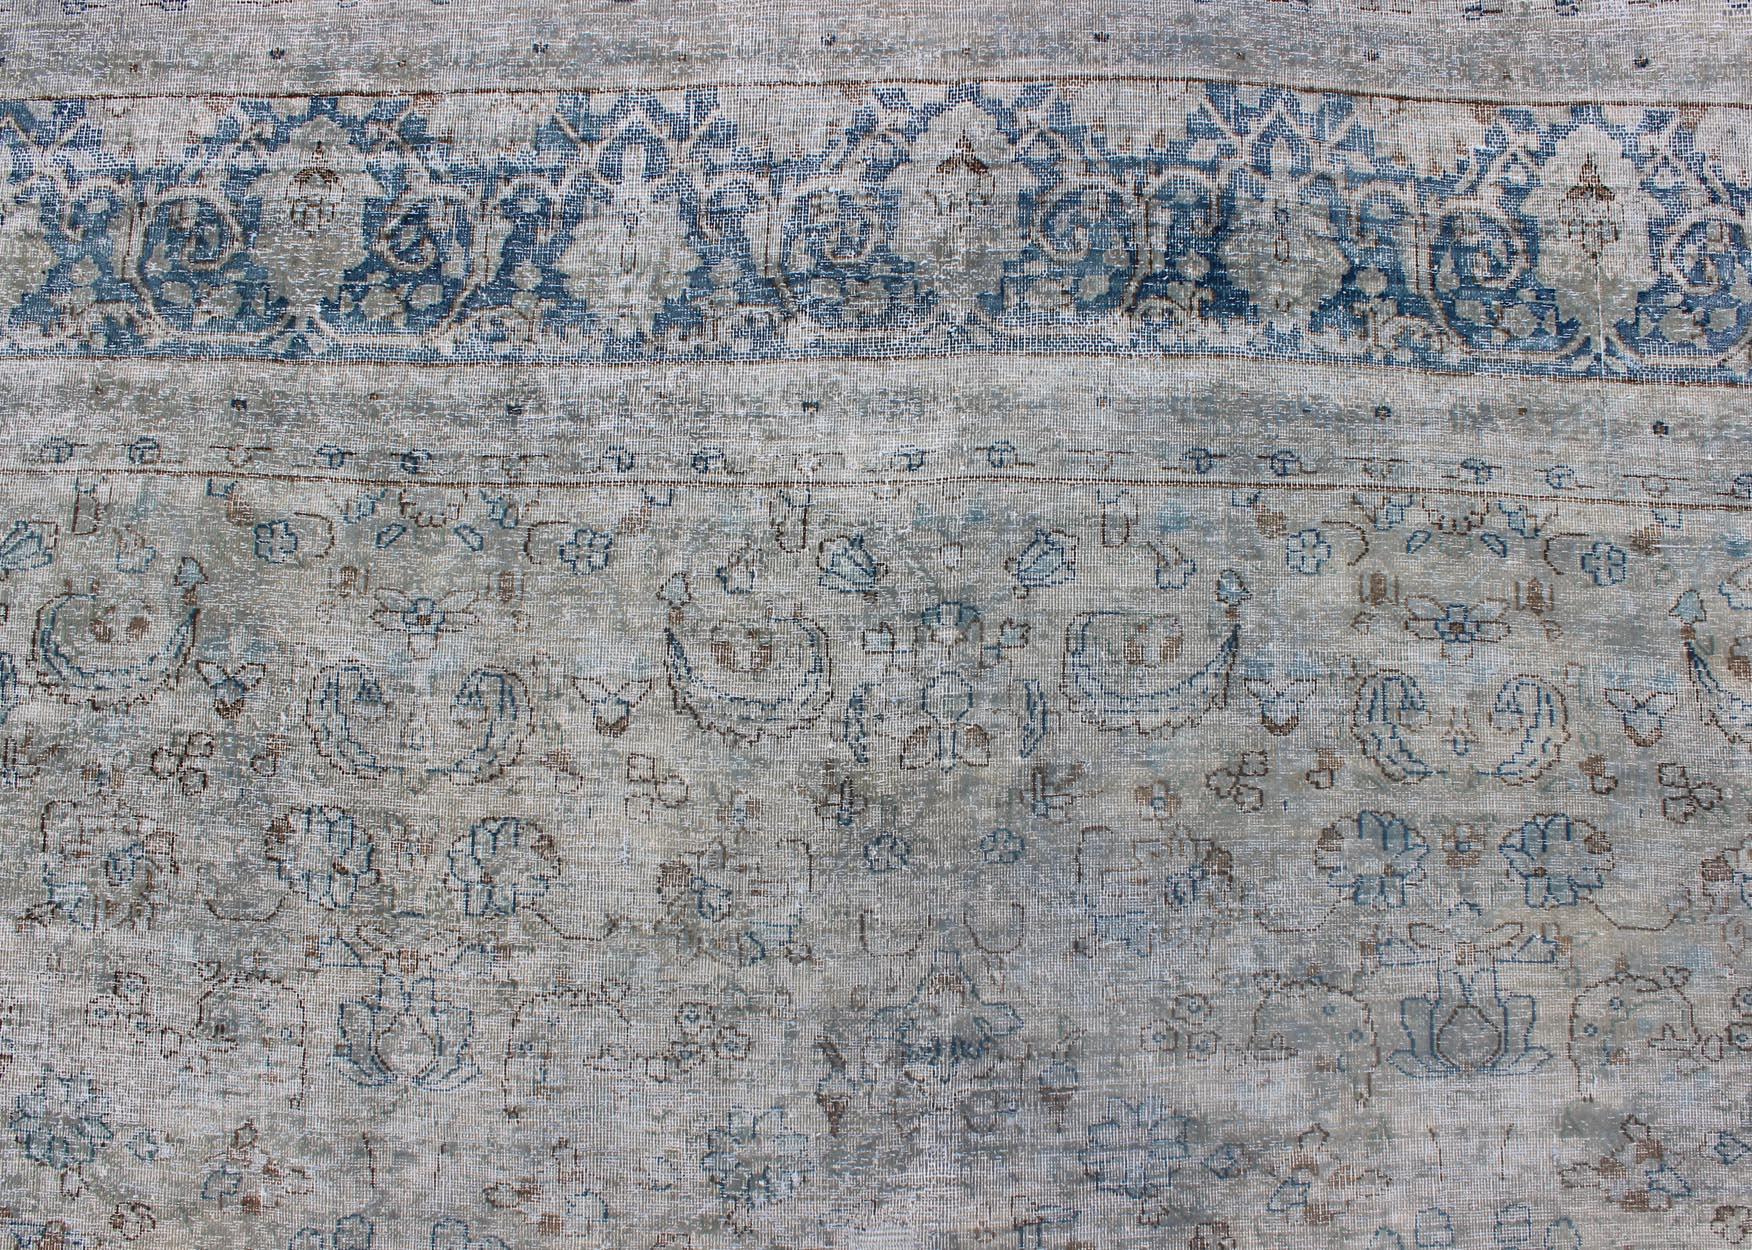 Mid-20th Century Blue/Gray Vintage Persian Distressed Rug with Modern and Rustic Design